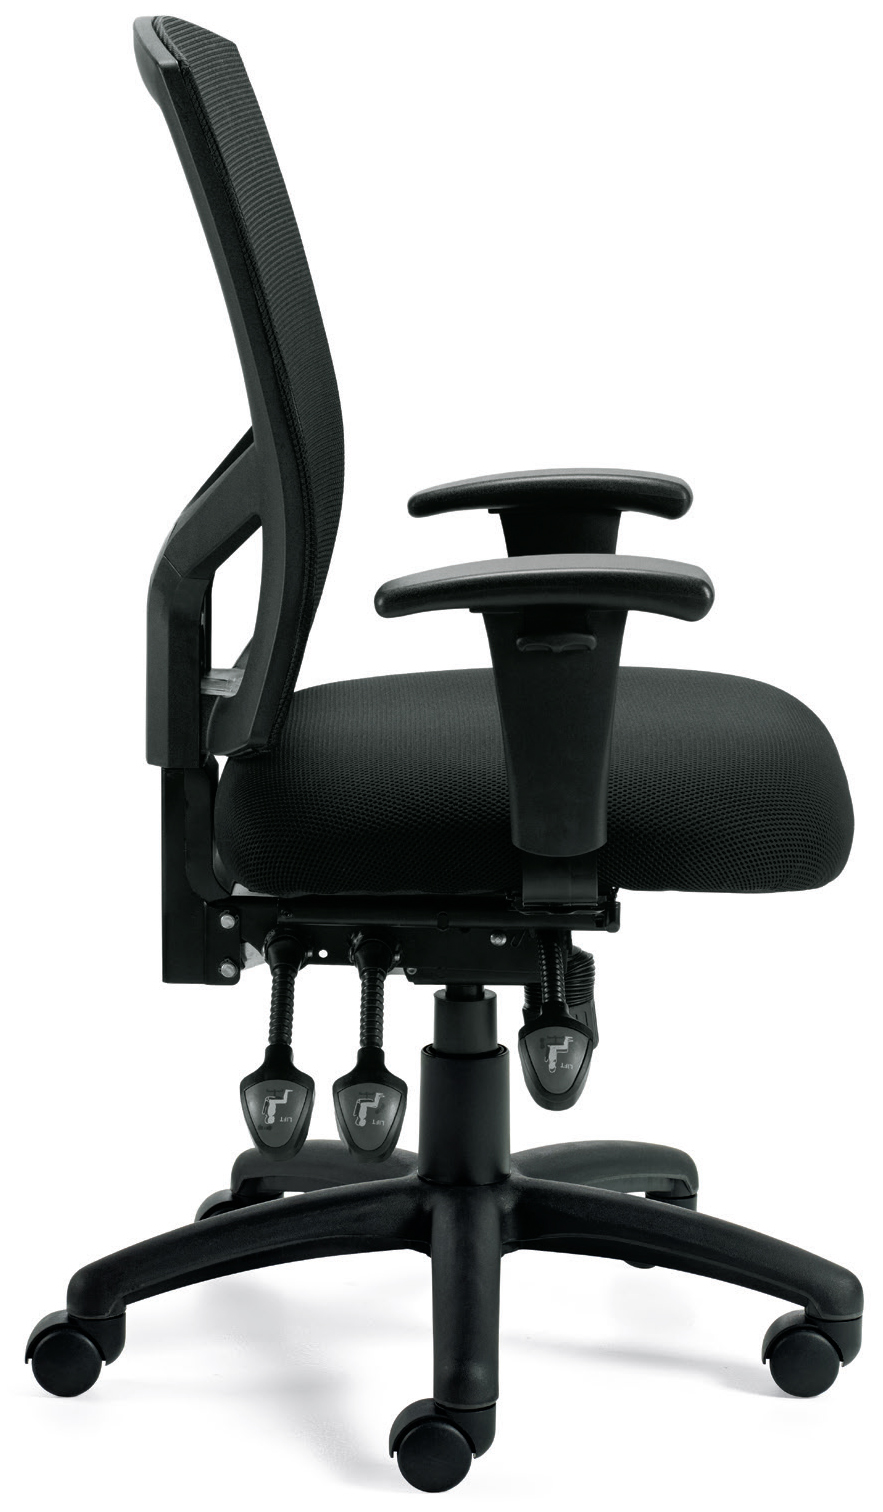 Offices To Go™ Mesh Back Multi-function Chair with Arms, OTG11769B